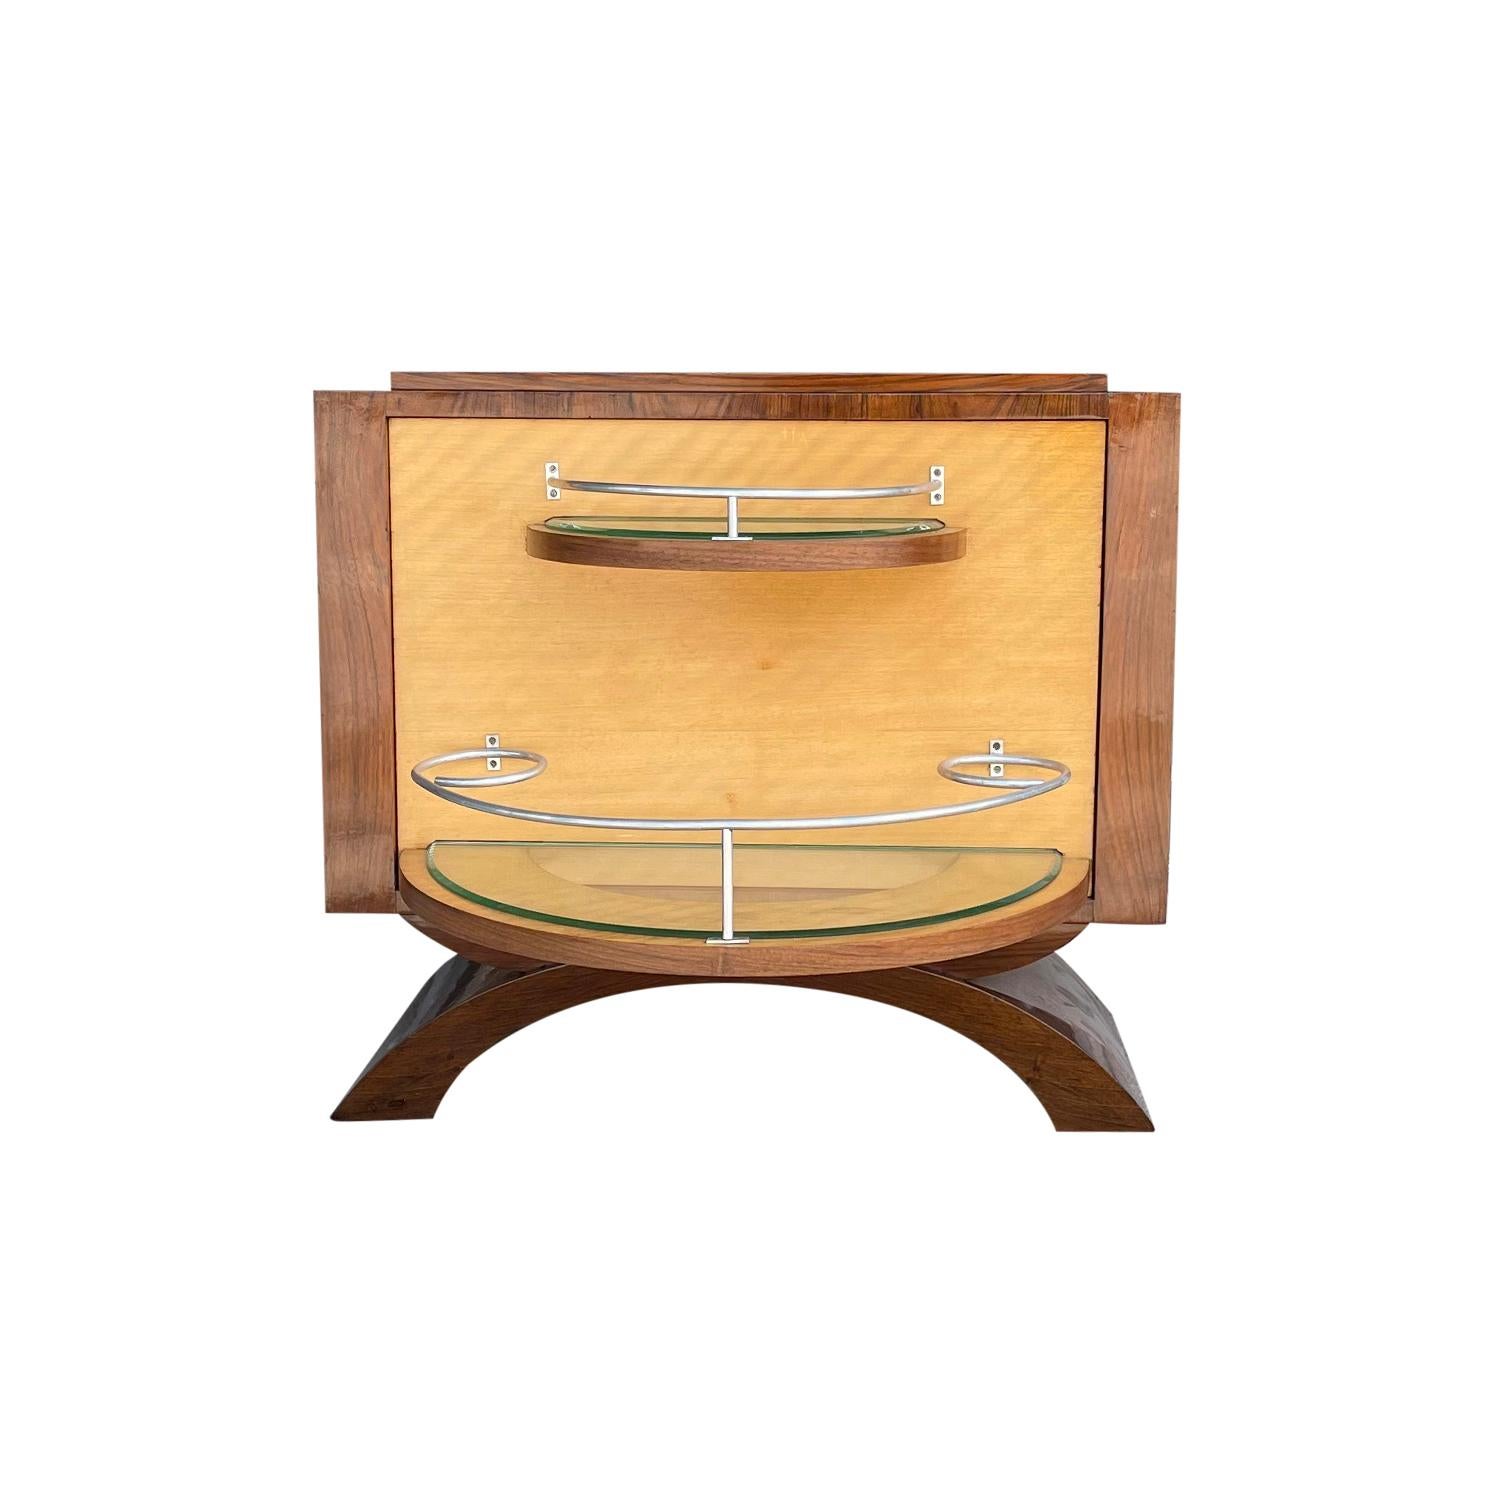 Hand-Crafted 20th Century French Art Deco Walnut Dry Bar - Vintage Parisian Side Table For Sale